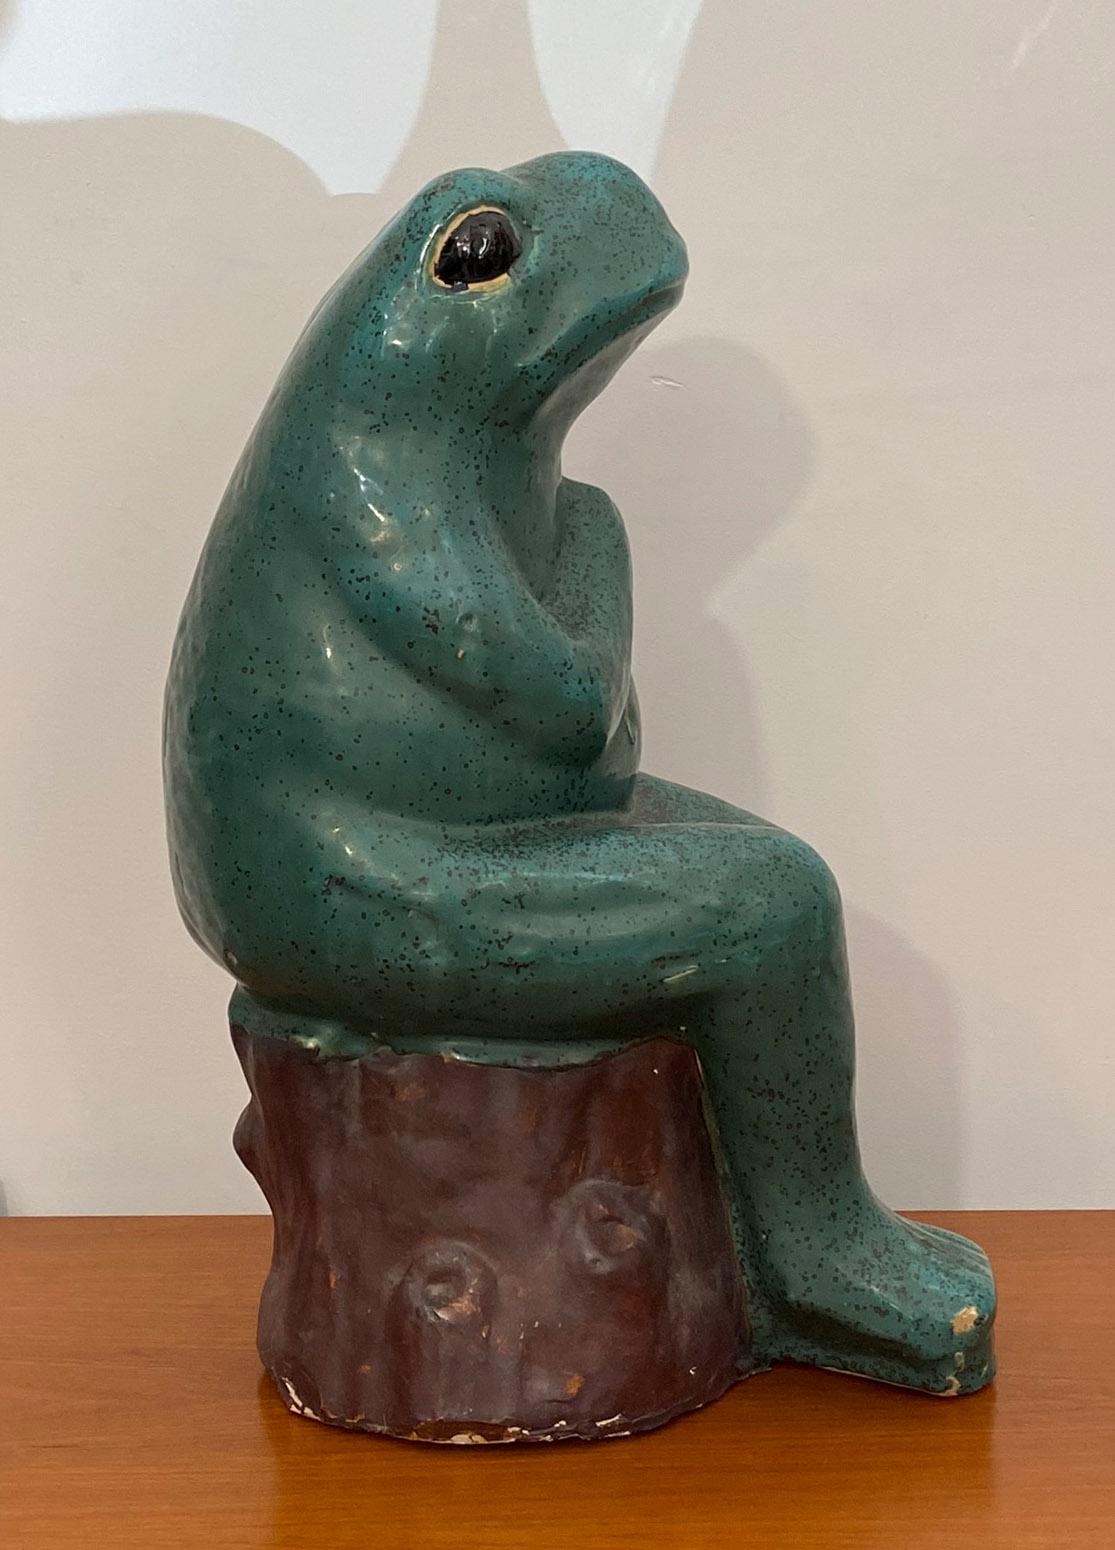 Italian Ceramic Frog Sitting on a Trunk, r Jerome Massier Style, 1960s